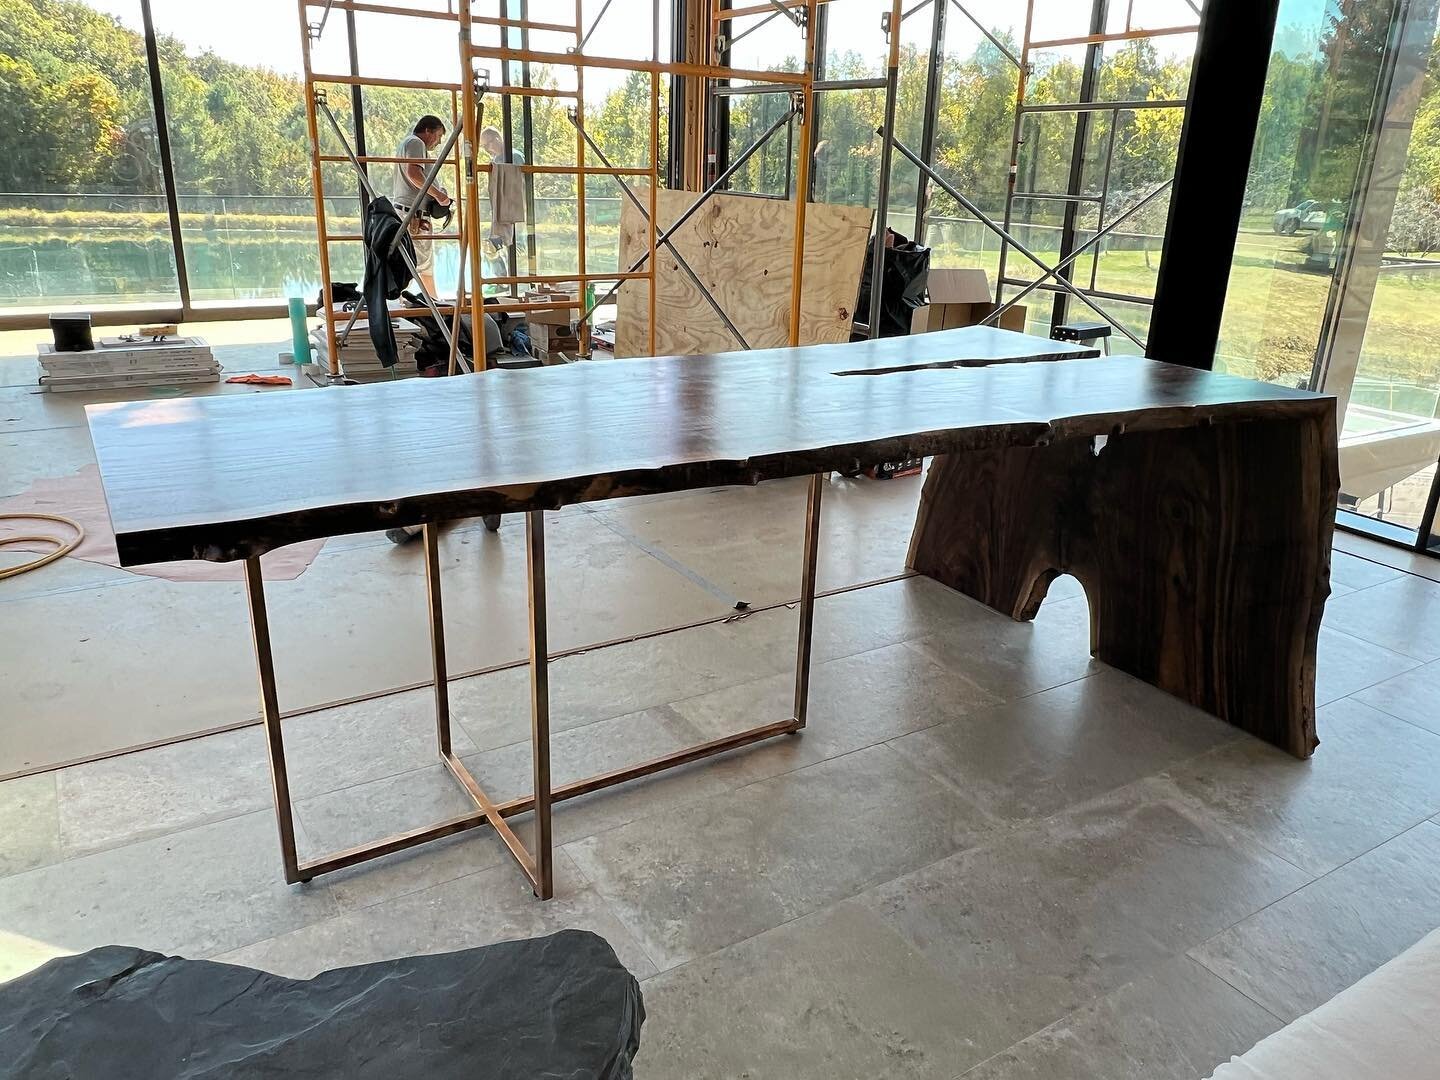 We delivered two waterfall #clarowalnut tables today. The big table will be the centerpiece in a sunroom addition and the smaller table will live in the renovated lower level lounge - both designed in collaboration with @laa_office. Great work by @bu